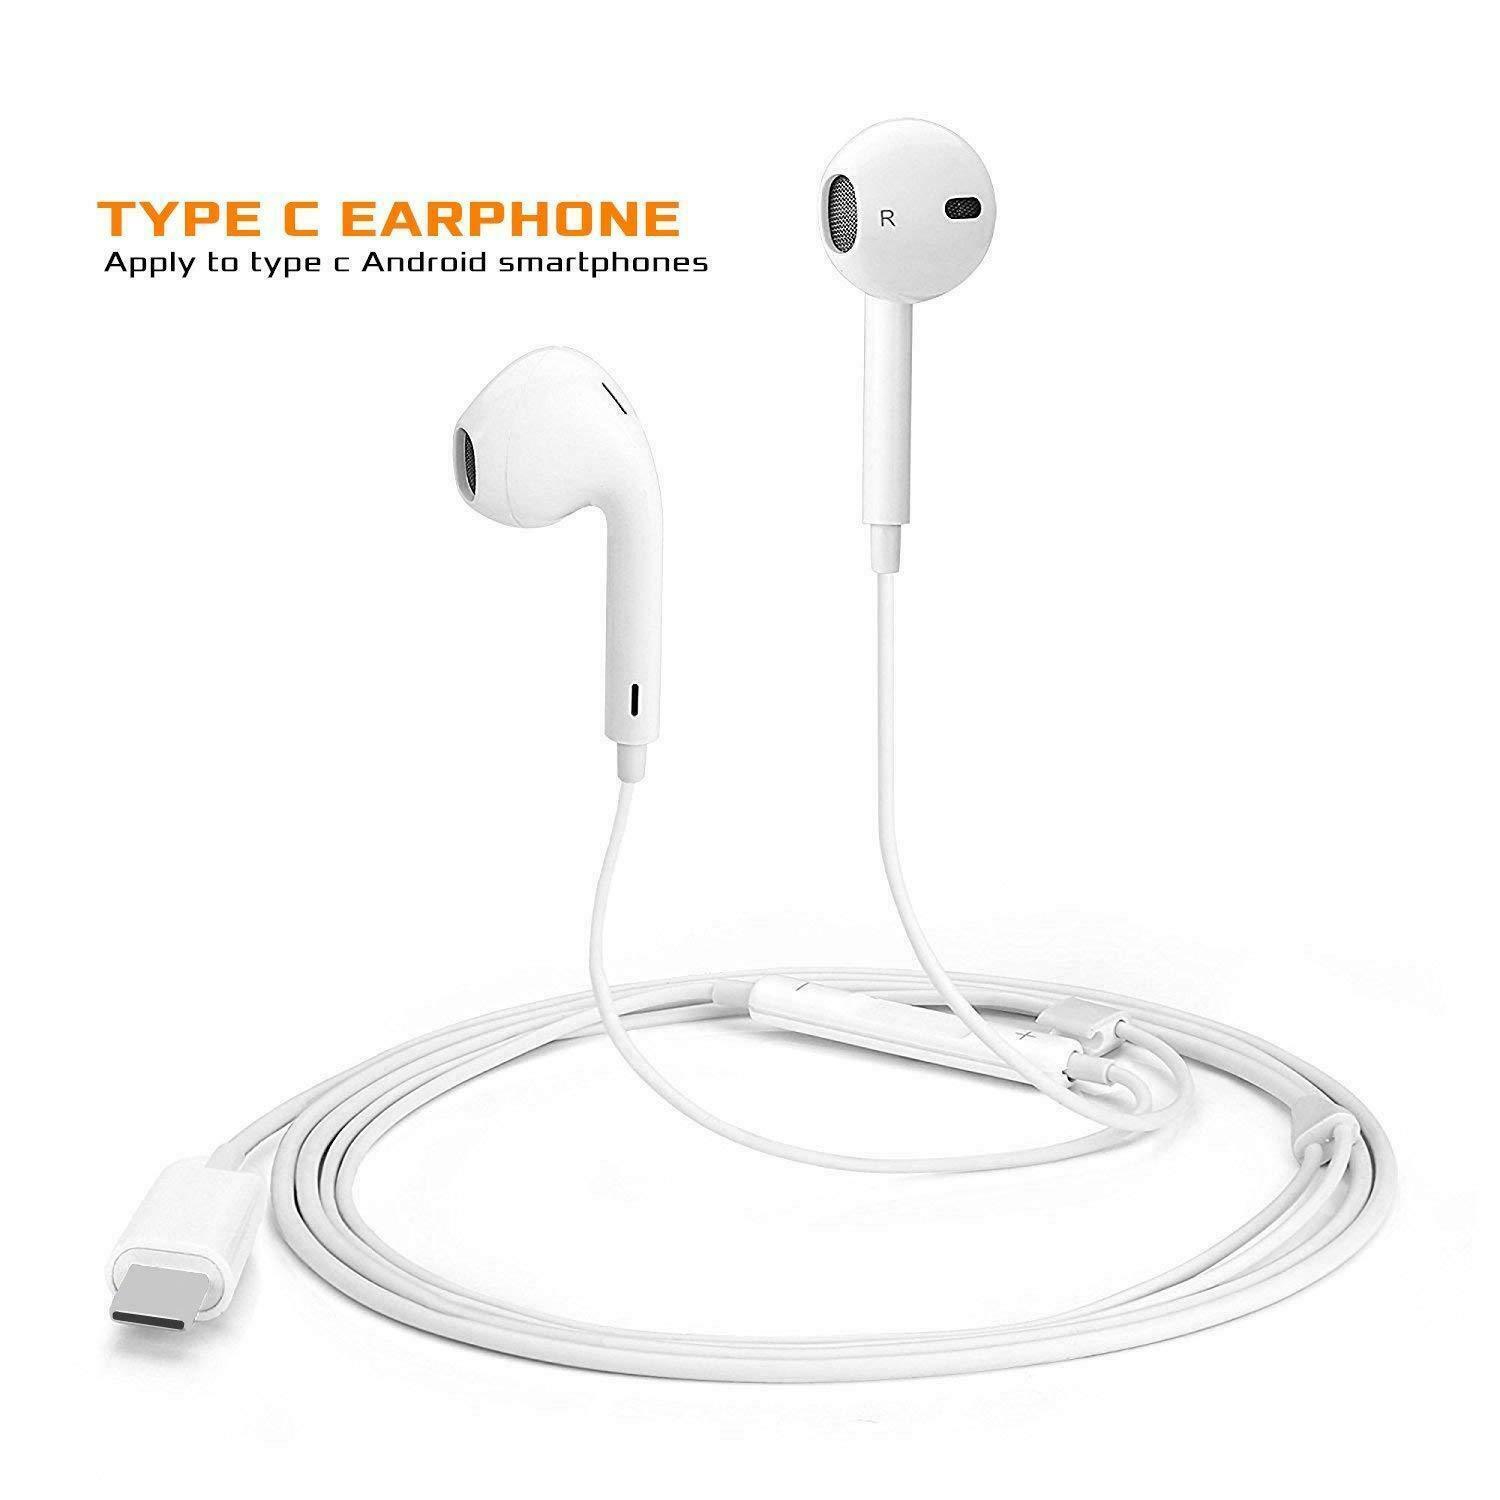 Type C USB-C Earphones Headphones Headsets with Mic & Volume Control for Huawei LG Google Samsung S8 S9 Plus, White